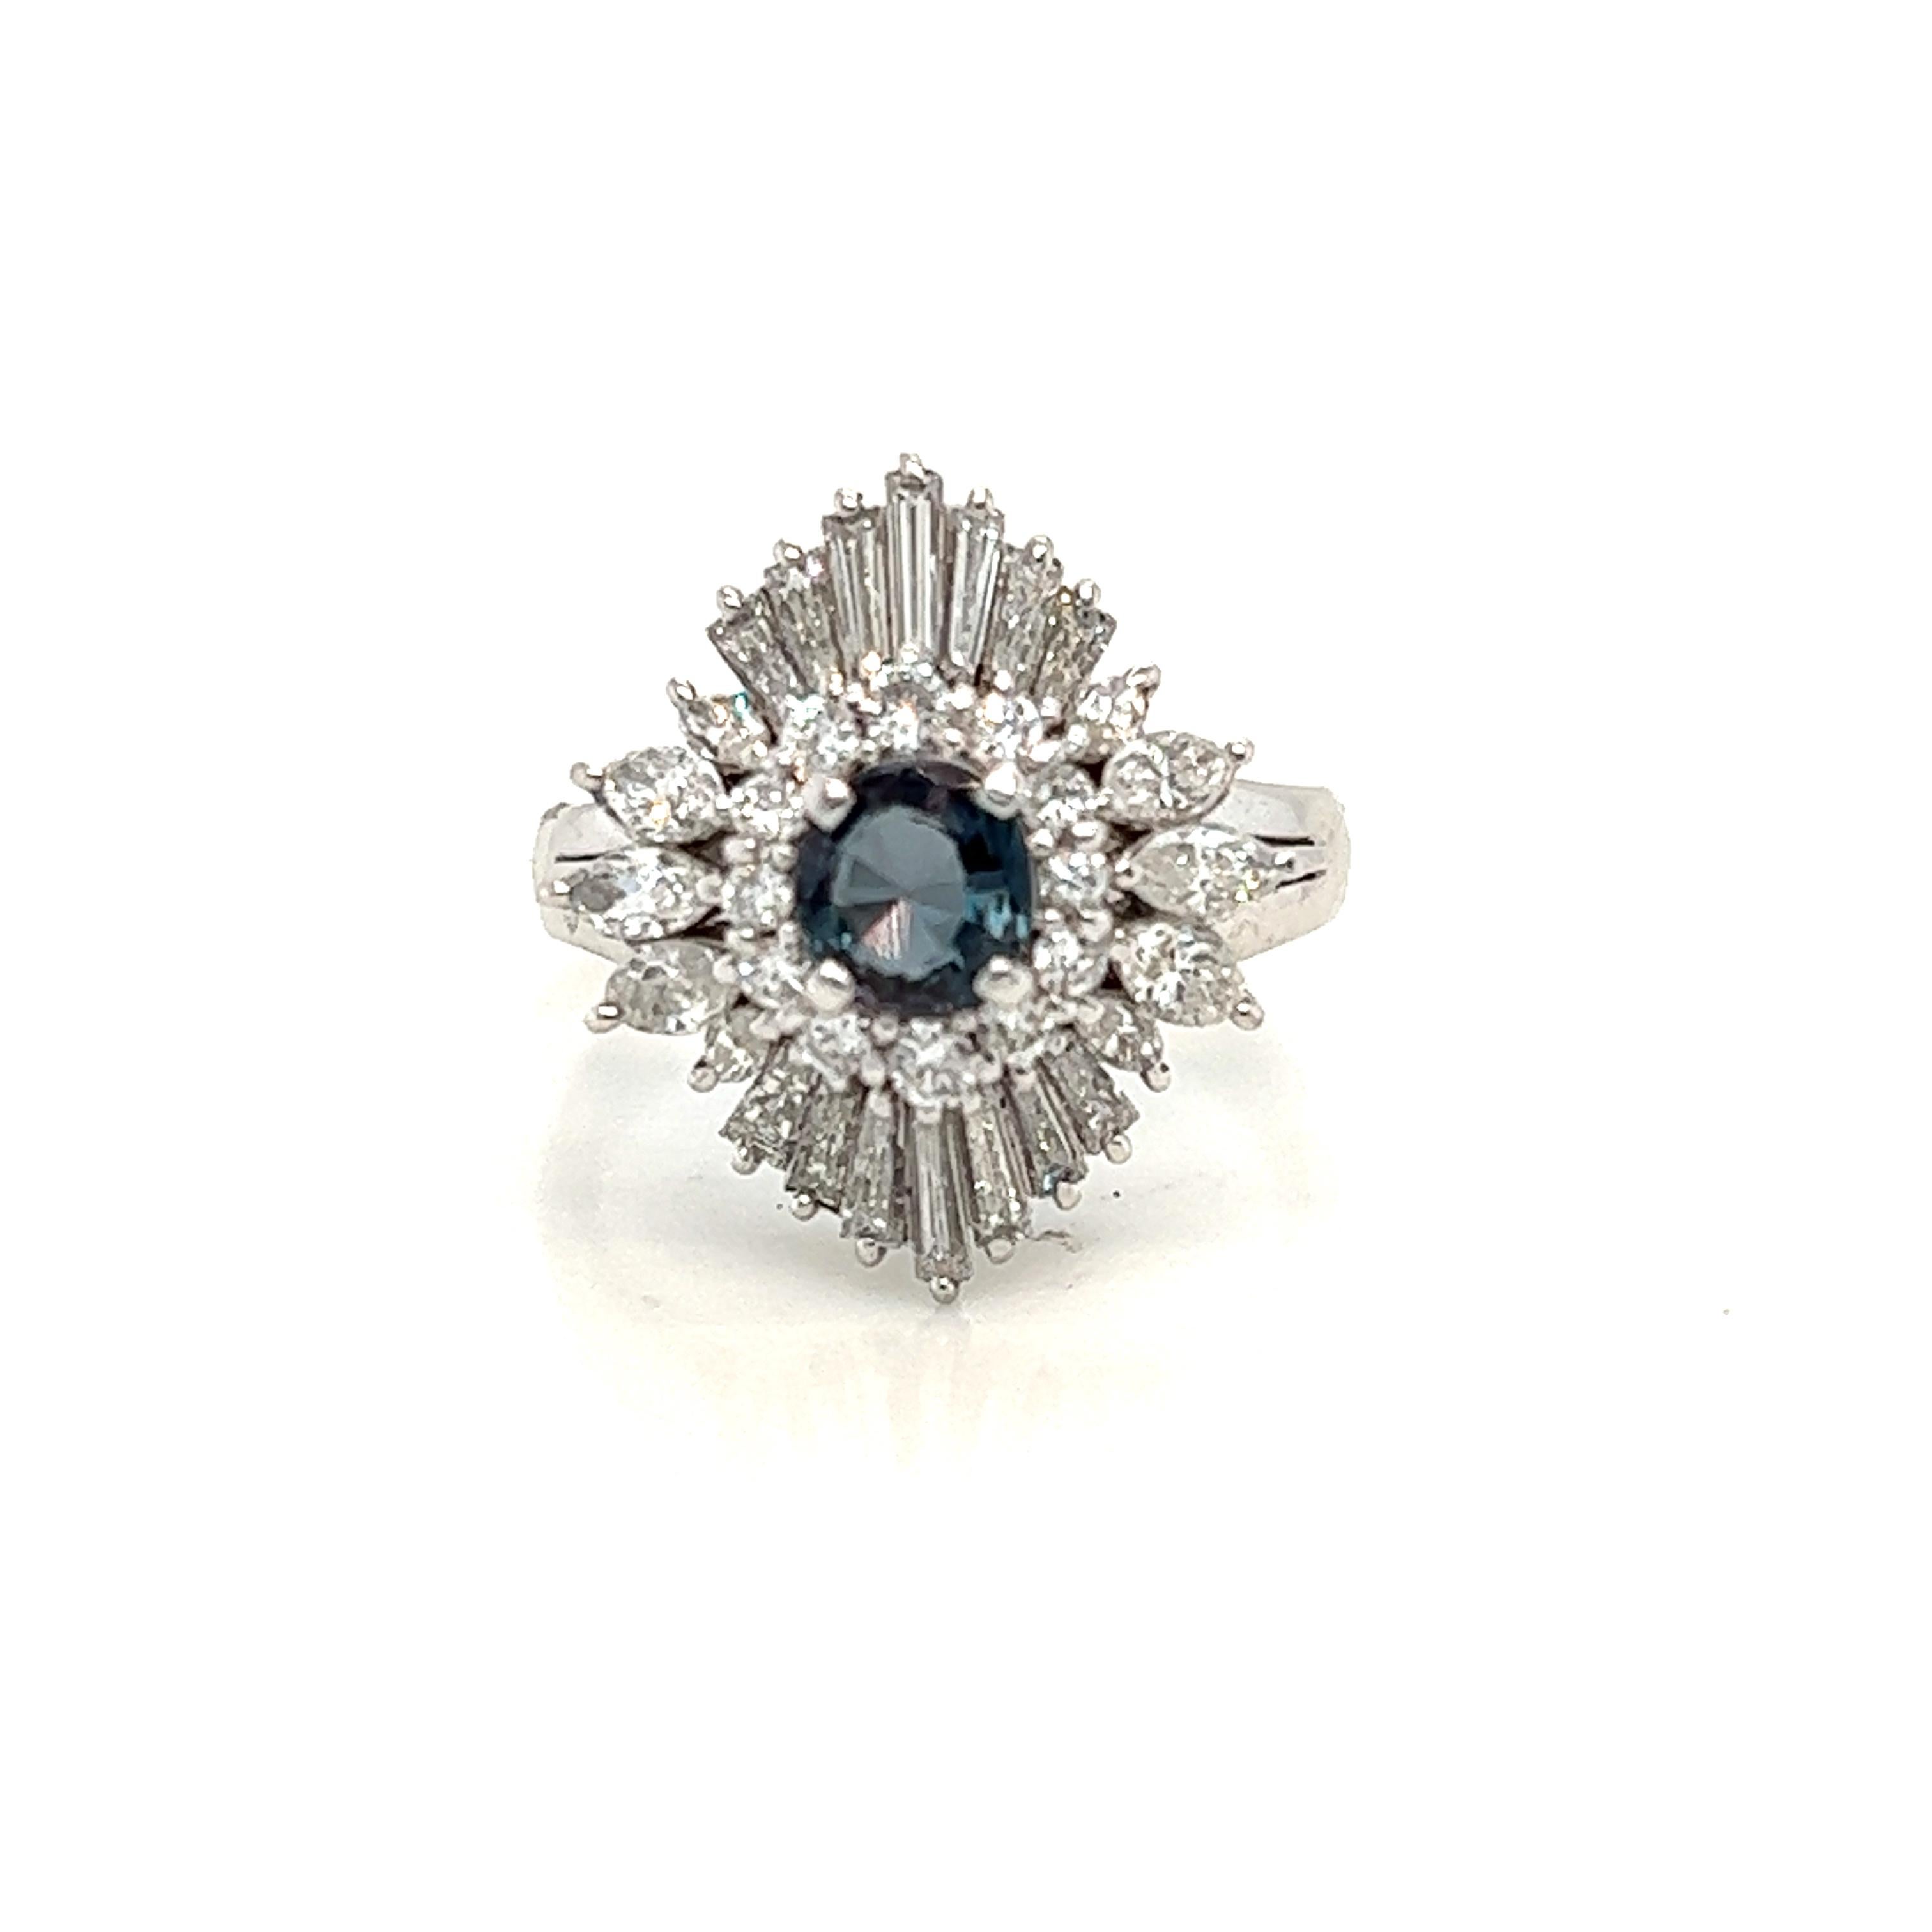 This is a gorgeous natural AAA quality Oval Alexandrite surrounded by dainty diamonds that is set in a cocktail platinum setting. This ring features a natural 0.61 carat oval alexandrite that is certified by the Gemological Institute of America